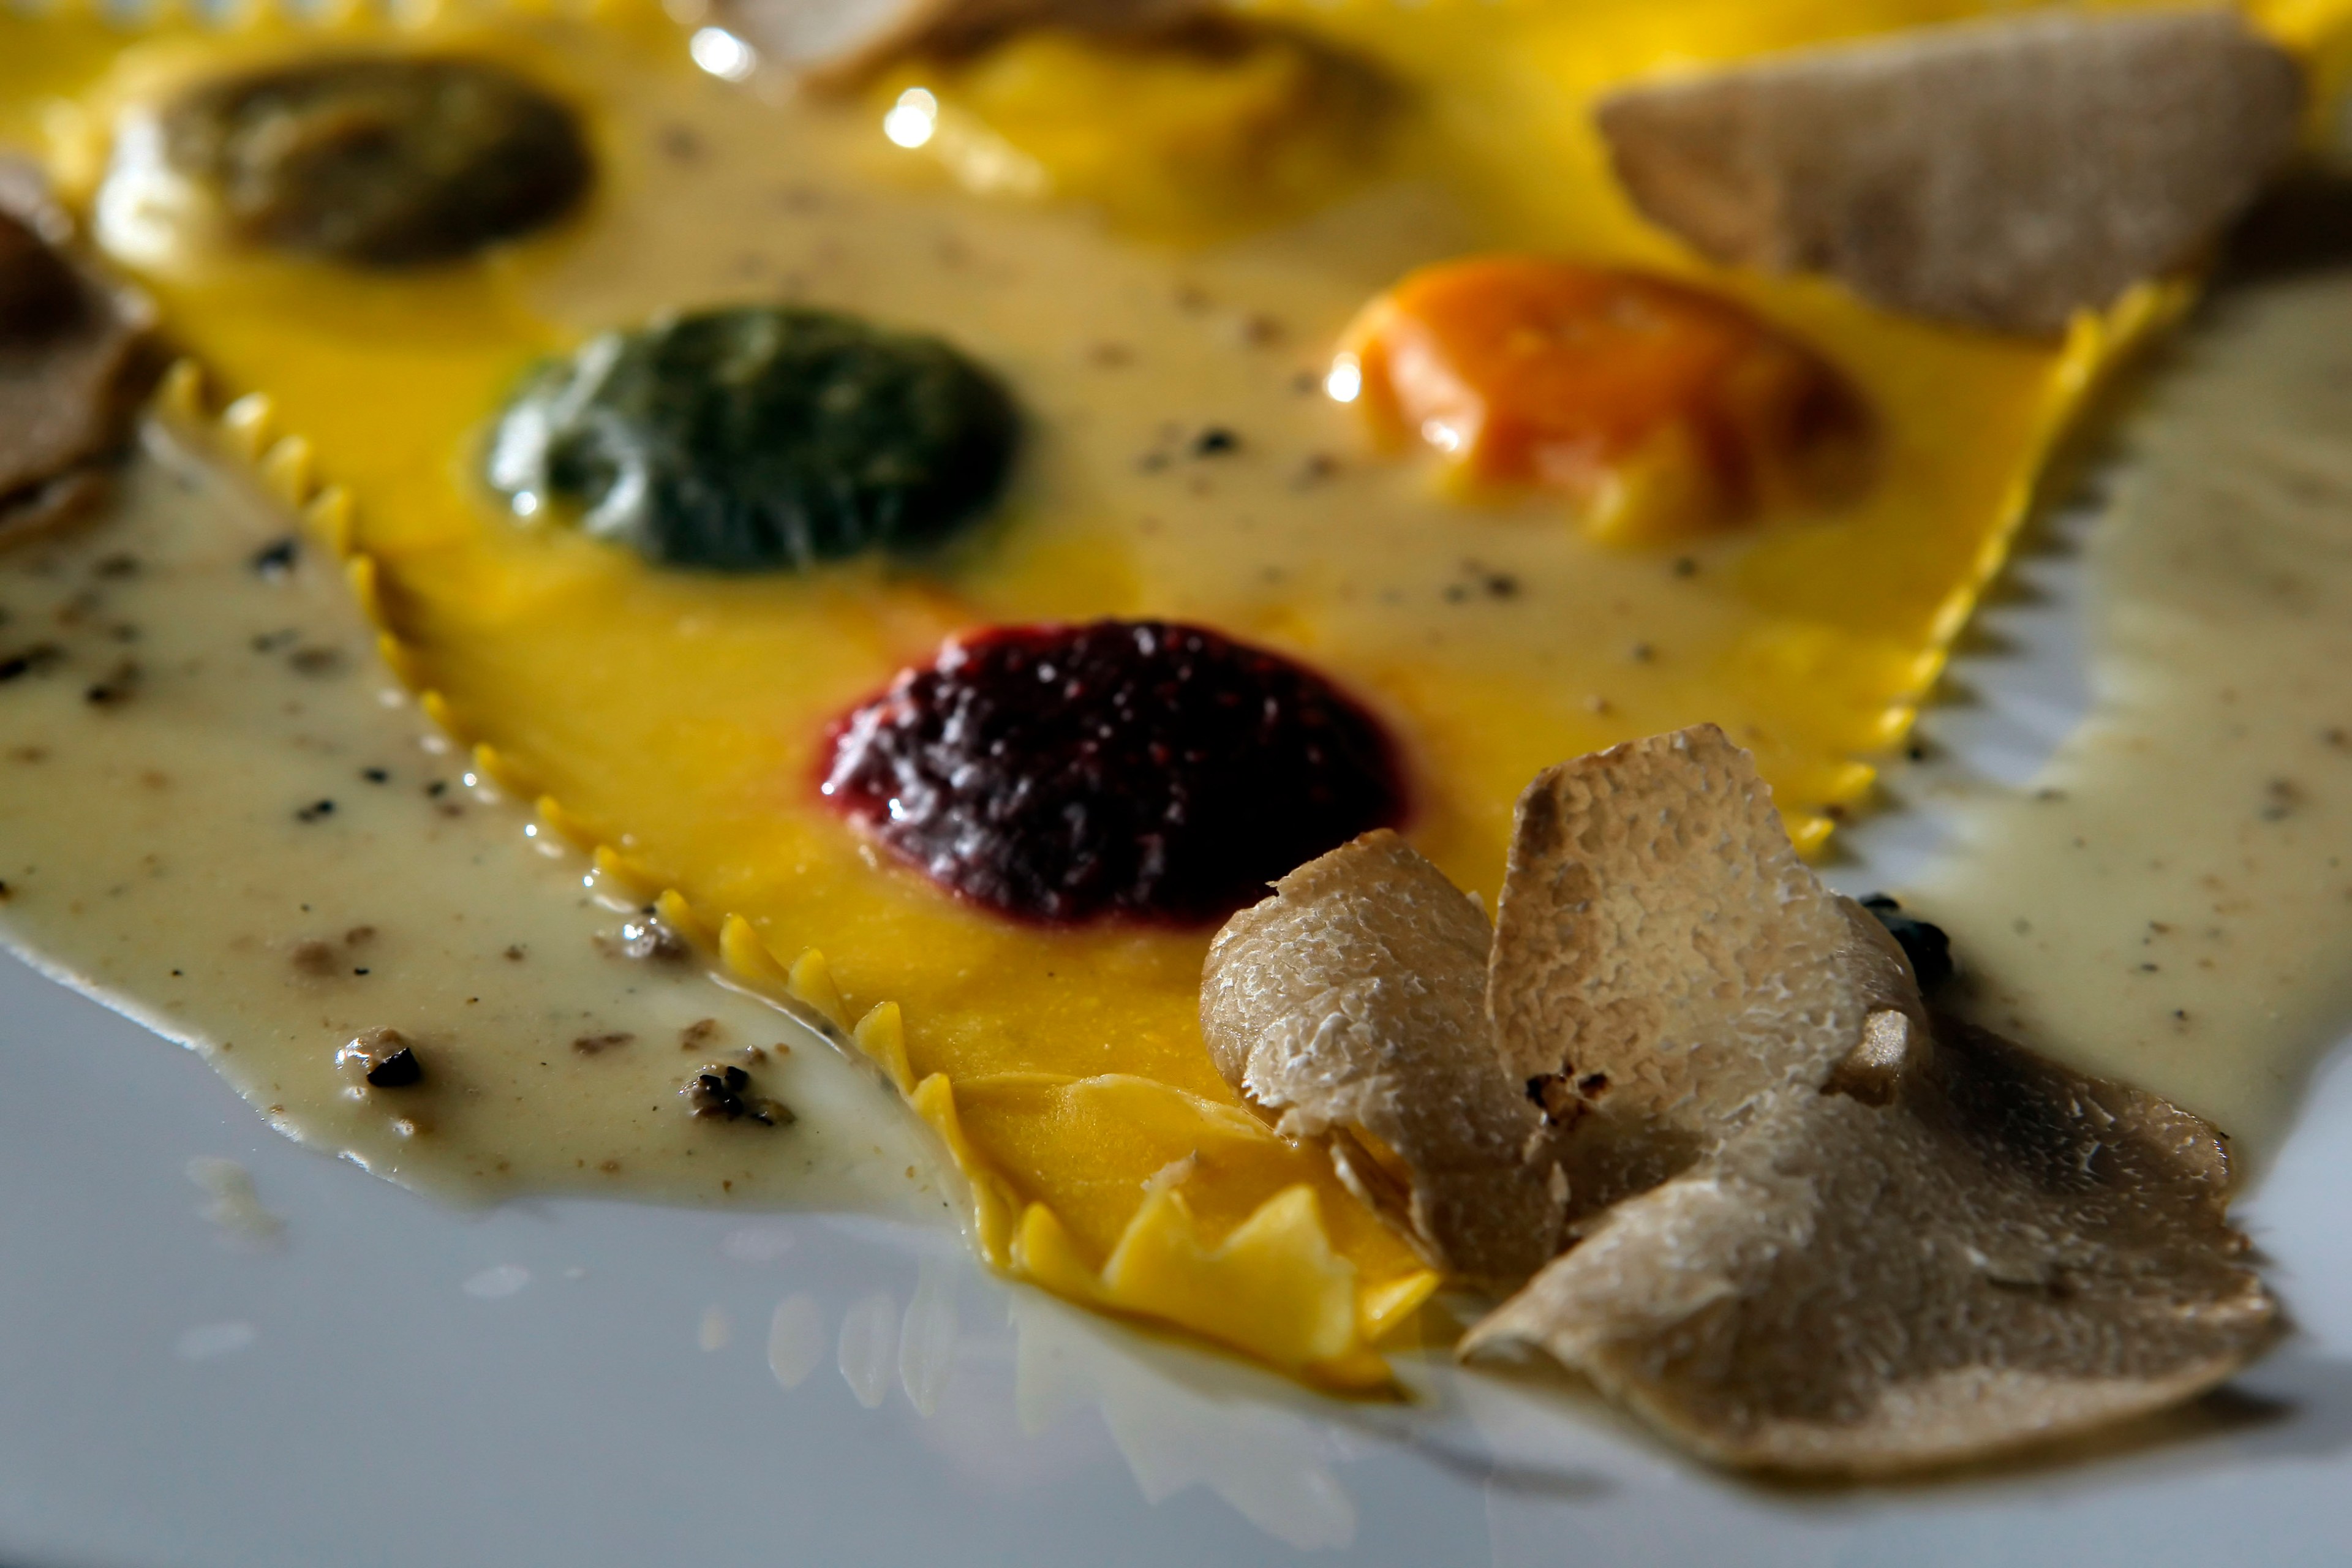 A close-up of ravioli is shown with various sauces and black truffles.